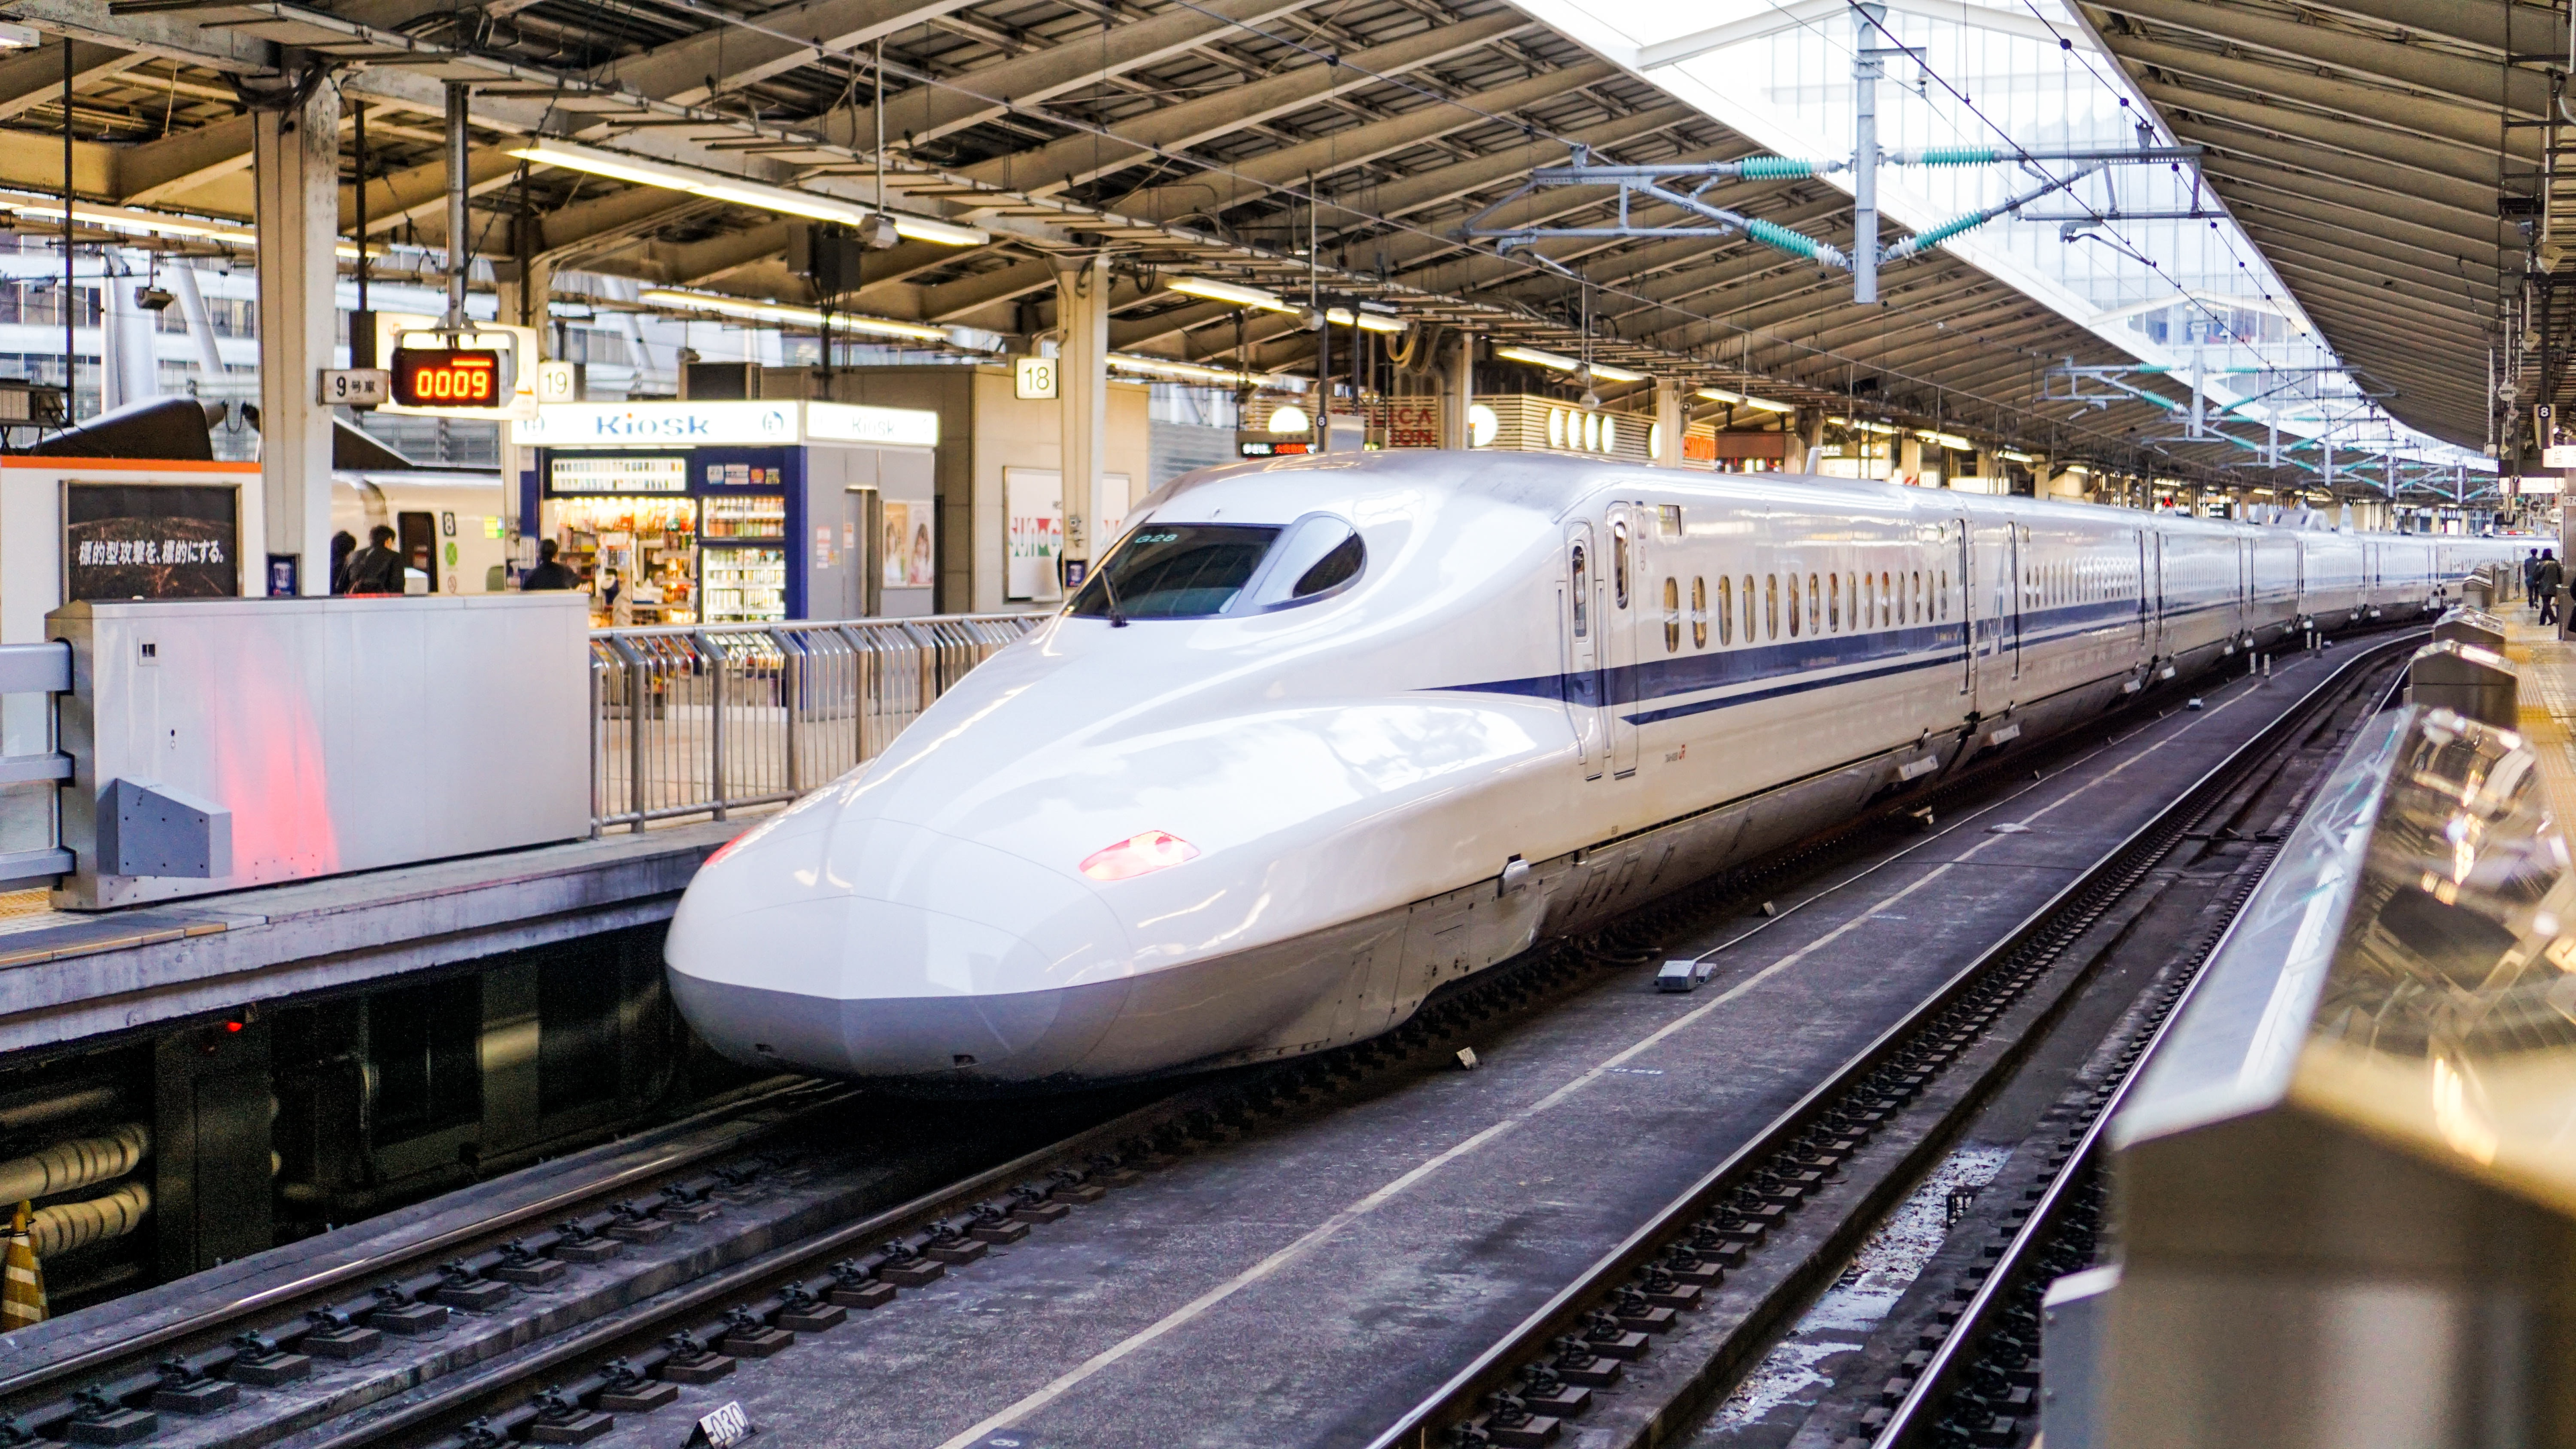 Japan Rail Pass Price Increase: What You Need to Know Before Your Next Trip